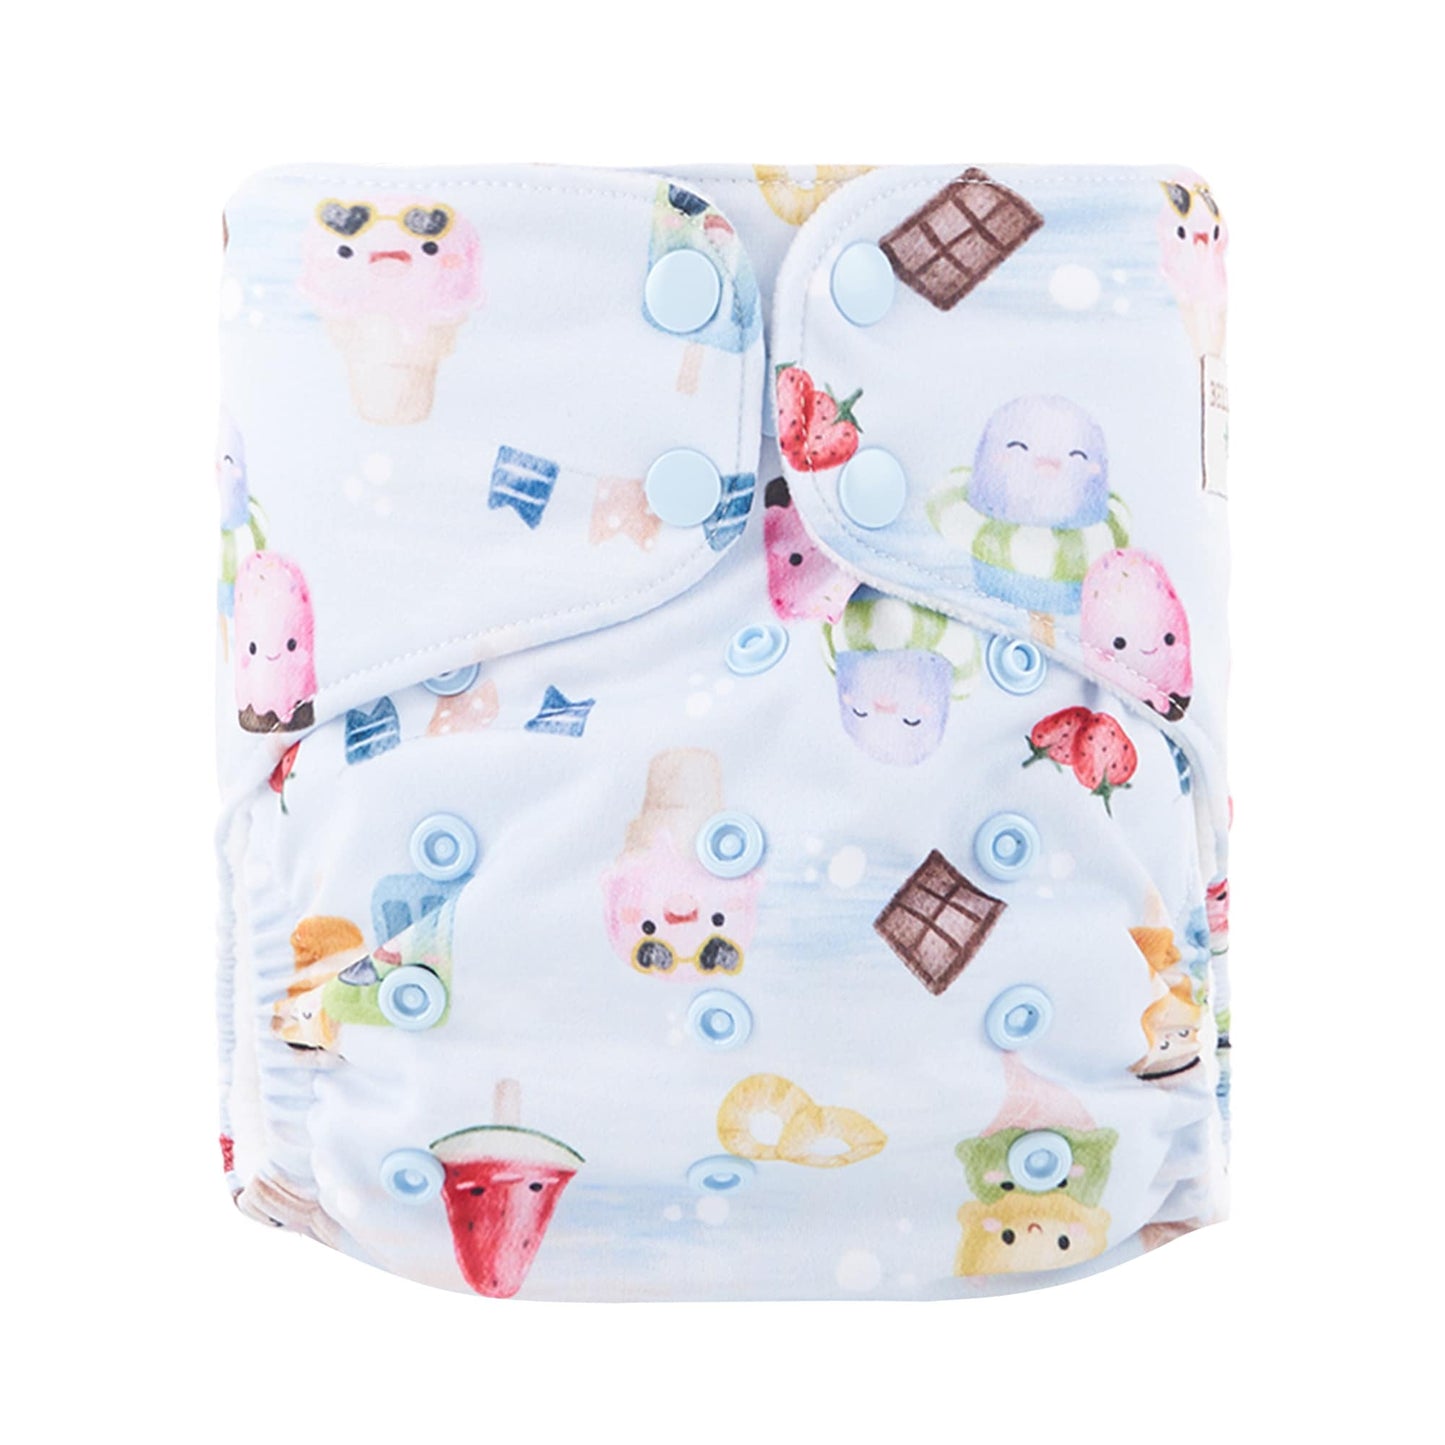 Image of a Bells Bumz nappy shell featuring the Anything is Popsical print